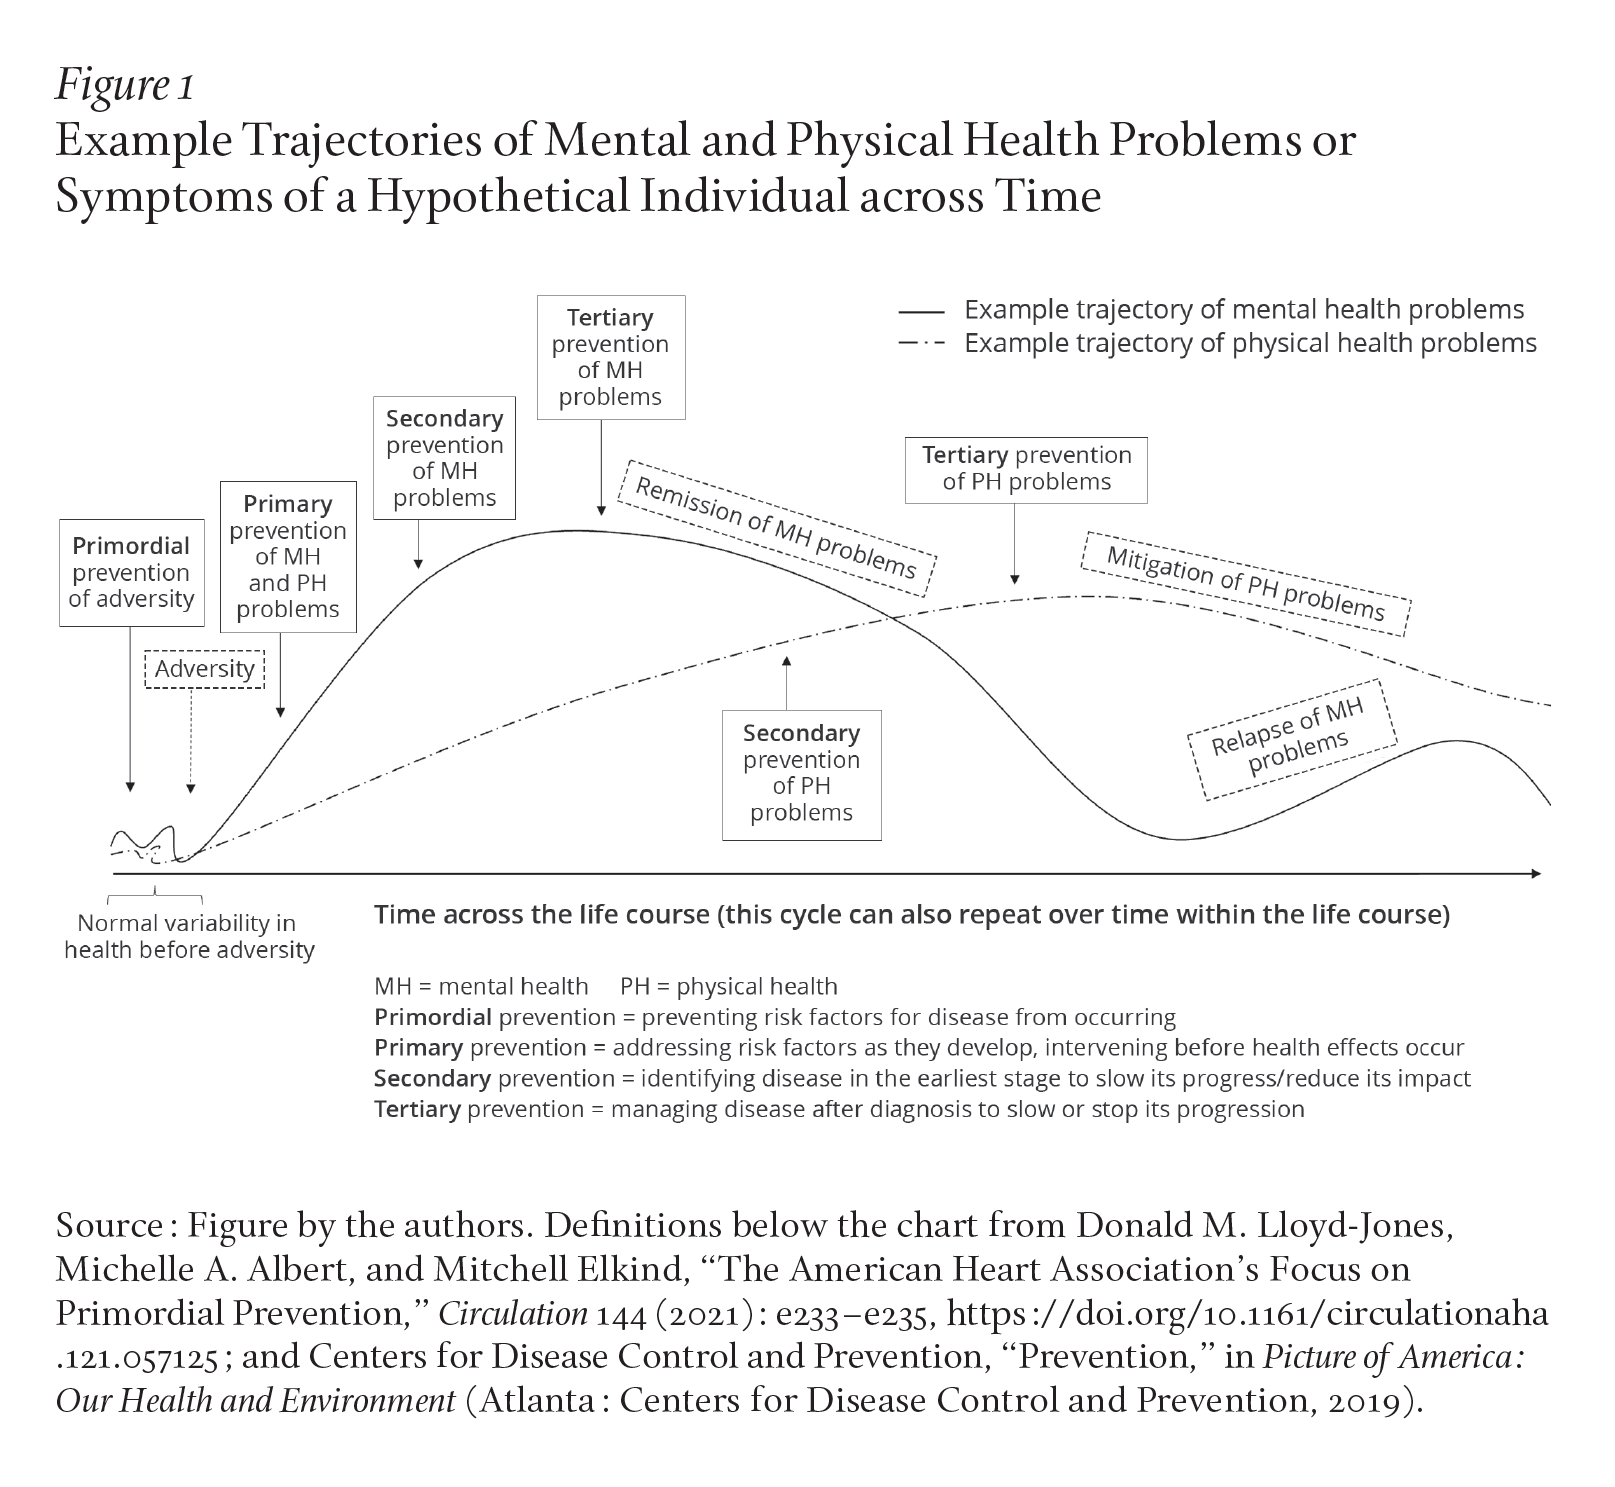 A graph showing example trajectories of mental and physical health problems or symptoms of a hypothetical individual across time. It illustrates a cycle of adversity and primary, secondary, and tertiary prevention of mental and physical health problems, including remission and relapse. 